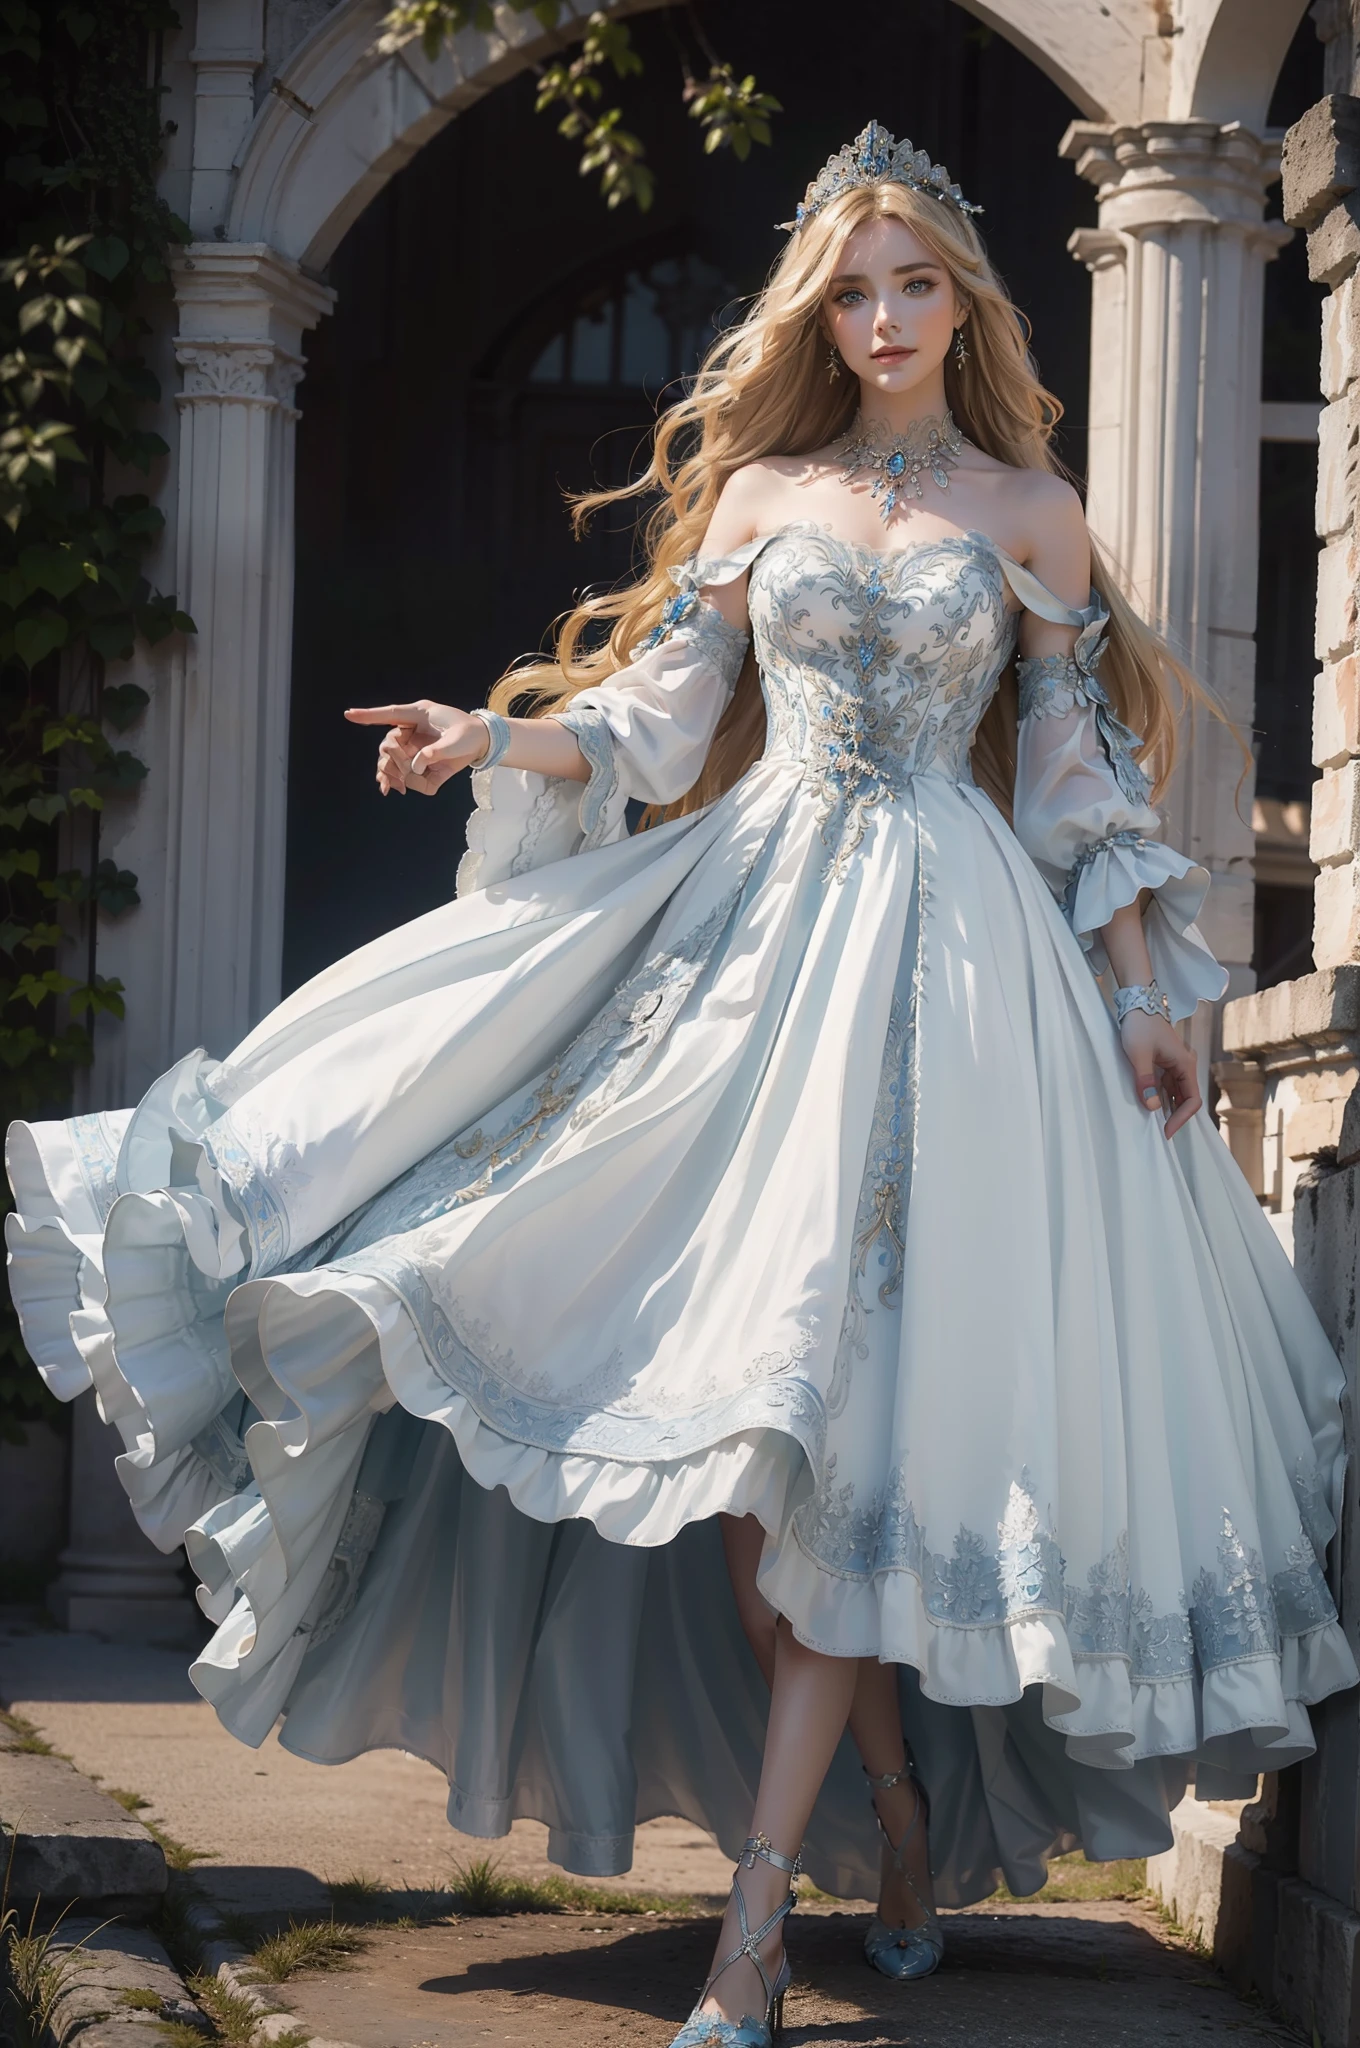 ((top-quality、​masterpiece、photographrealistic:1.4、in 8K))、Beautuful Women、18year old、Beautiful expression、a blond、extremely detailed eye and face、beatiful detailed eyes、Formal Gloves、（Luxury dress with blue embroidery on white background、Headdress in the style of medieval Europe)、Luxury accessories、（Stroll through ancient European ruins。European style castle in the background）、Glass shoes、Cinematic lighting、Textured skin、Super Detail、high detailing、High quality、hight resolution、Looking at Viewer、Elegant smile、Full body、europian、Lots of plants、ivy